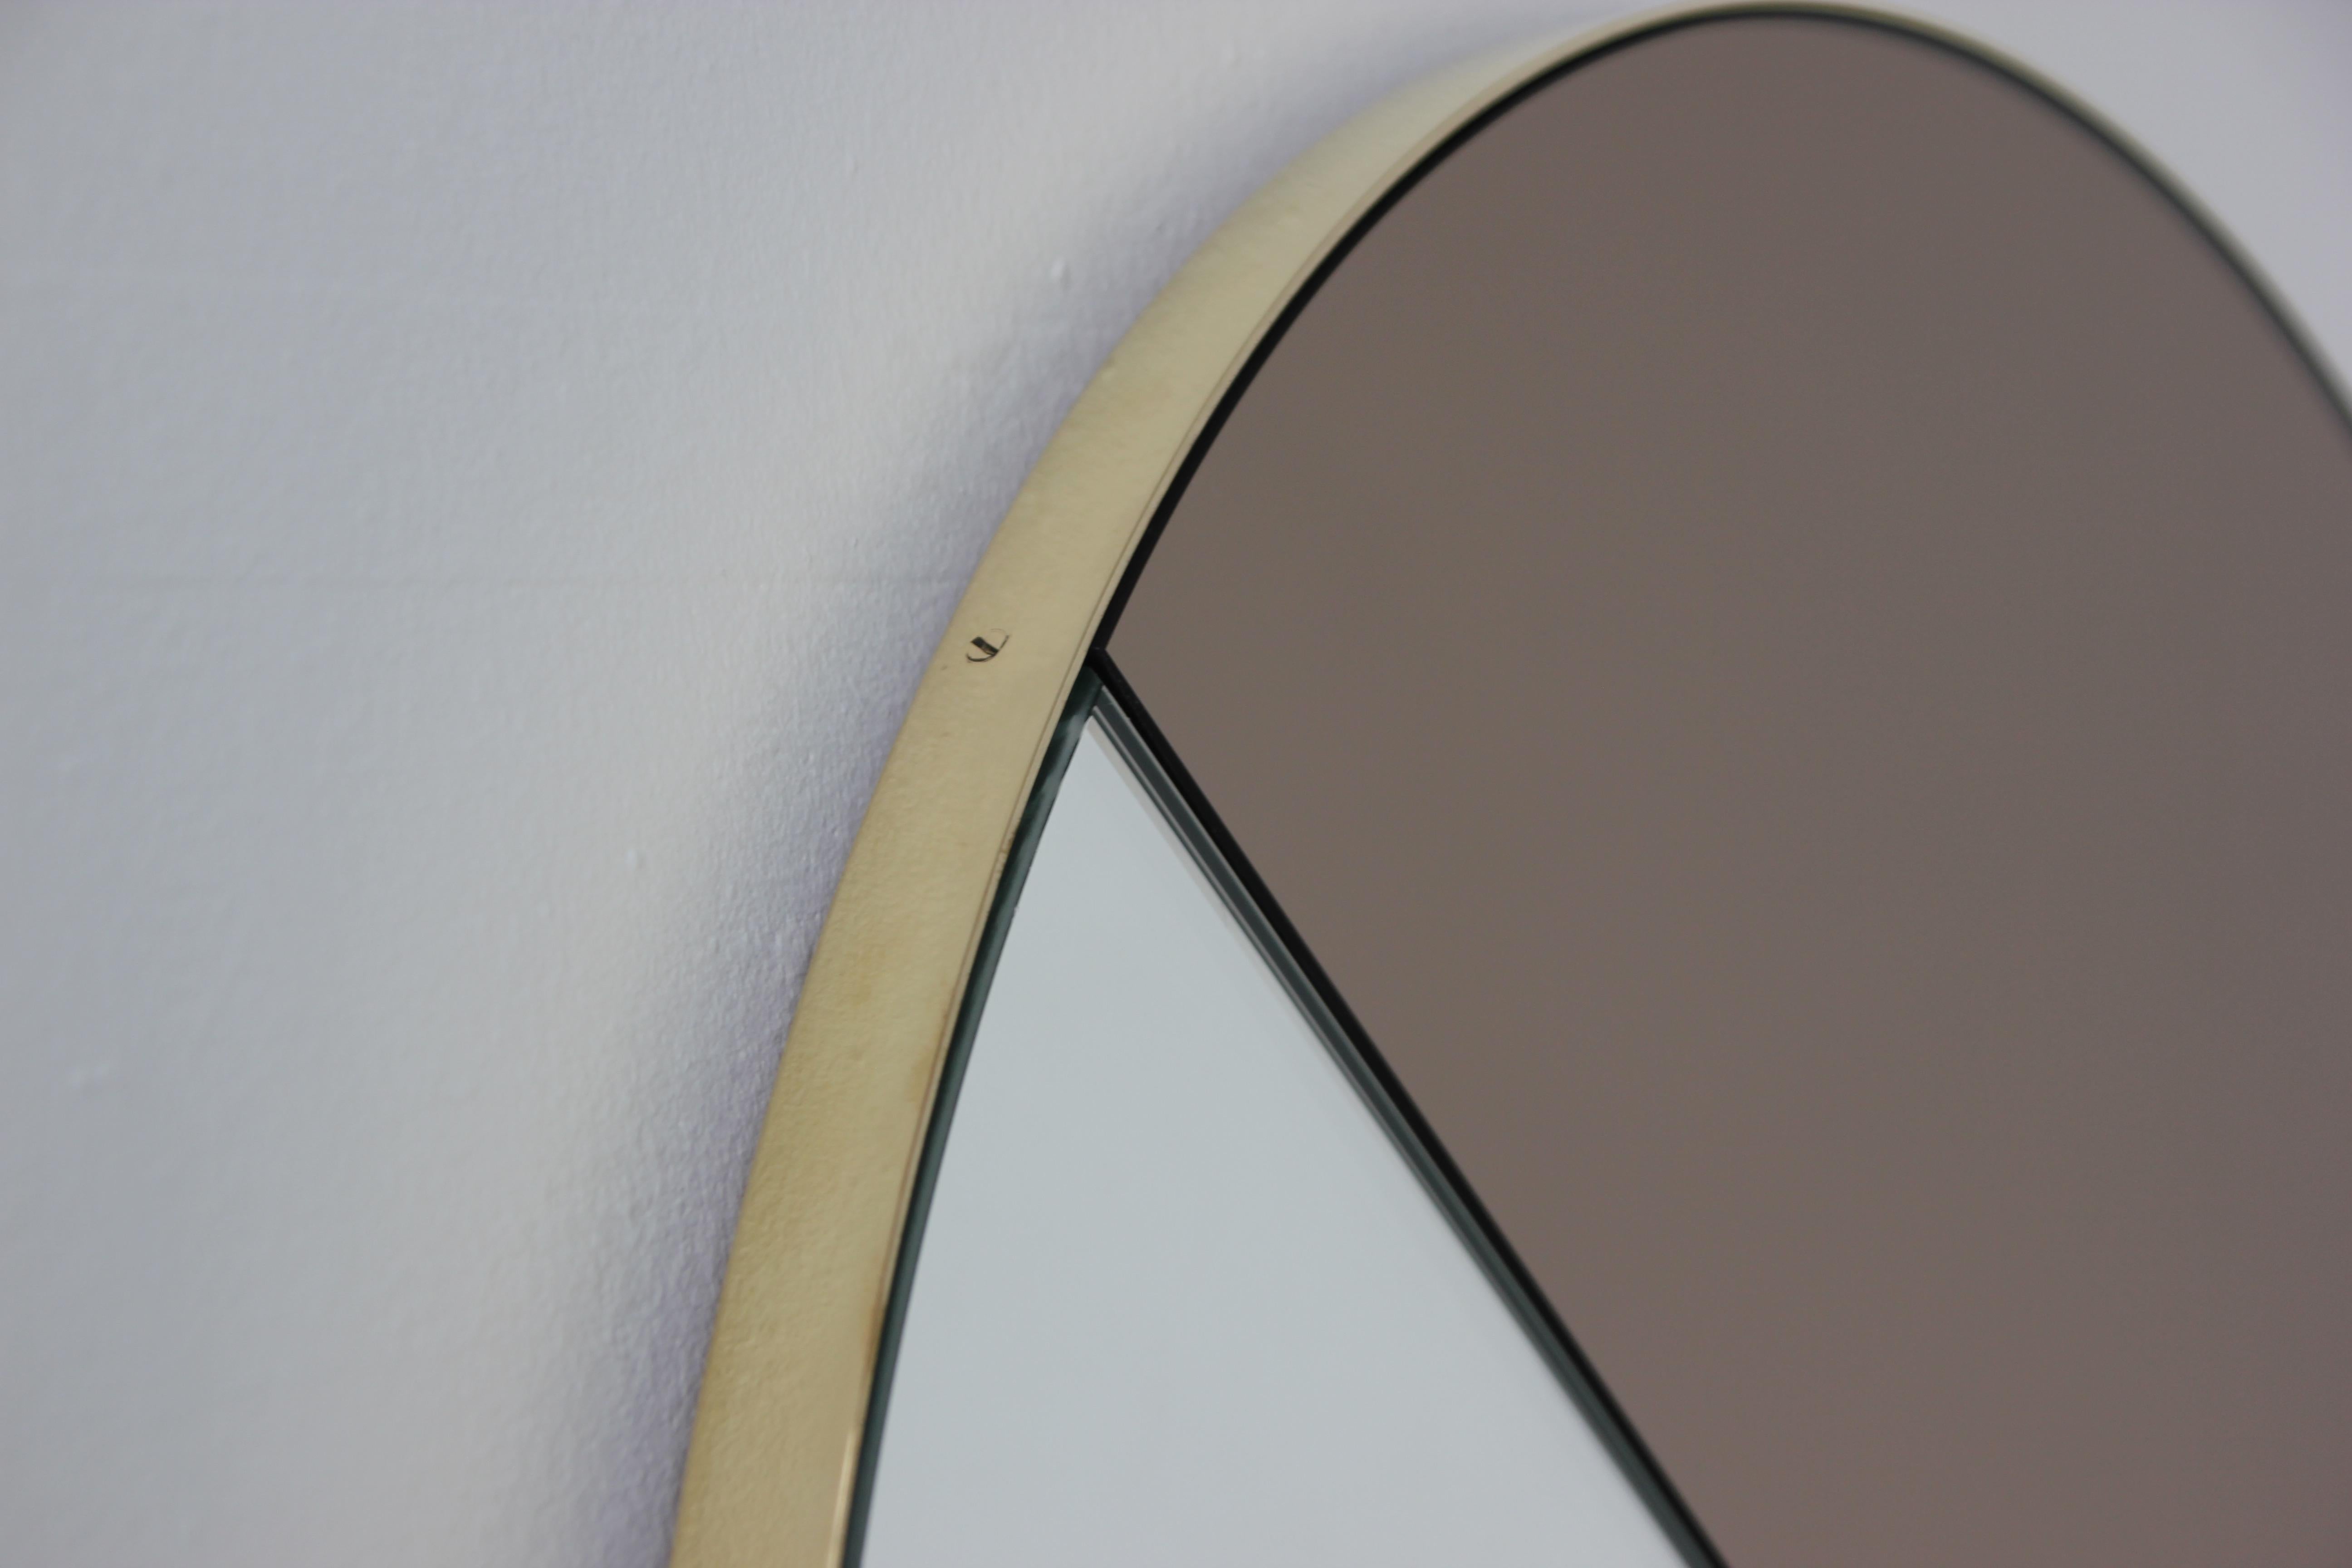 Contemporary mixed tinted bronze and standard silver Orbis Dualis™ mirror with an elegant solid brushed brass frame.  Fitted with a quality and ingenious hanging system for a flexible installation in 6 different positions (see pictures for